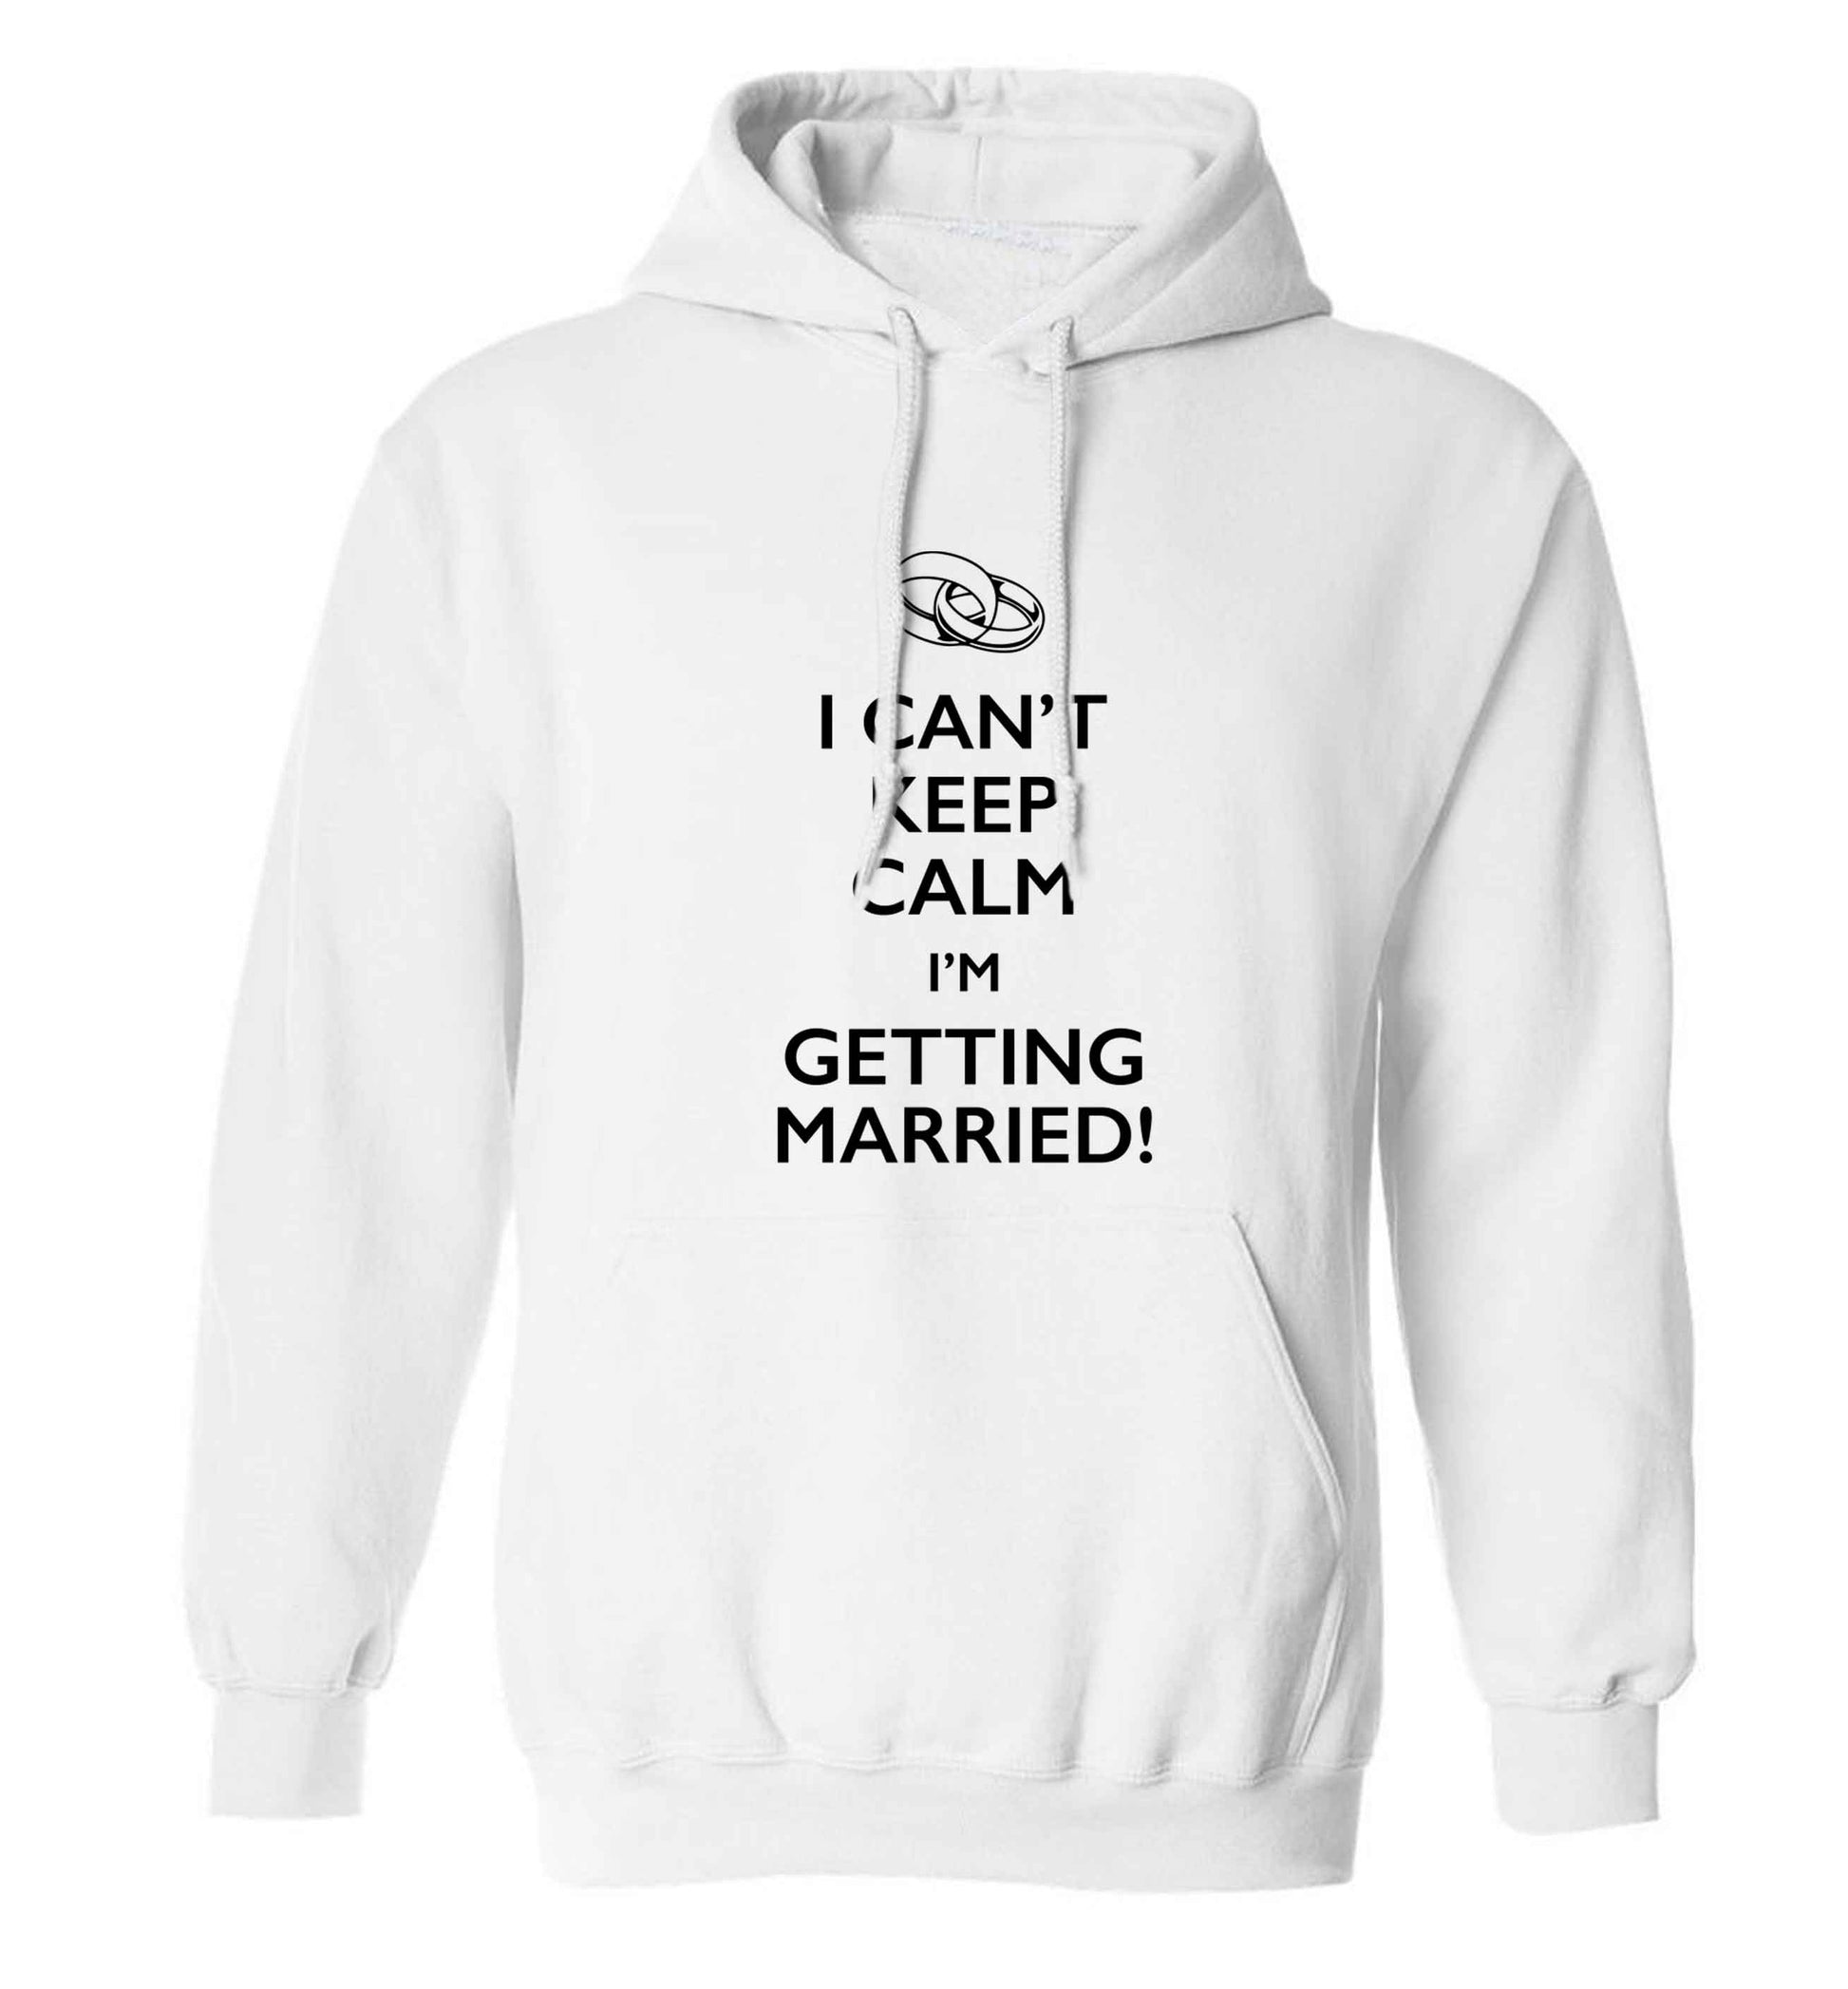 I can't keep calm I'm getting married! adults unisex white hoodie 2XL